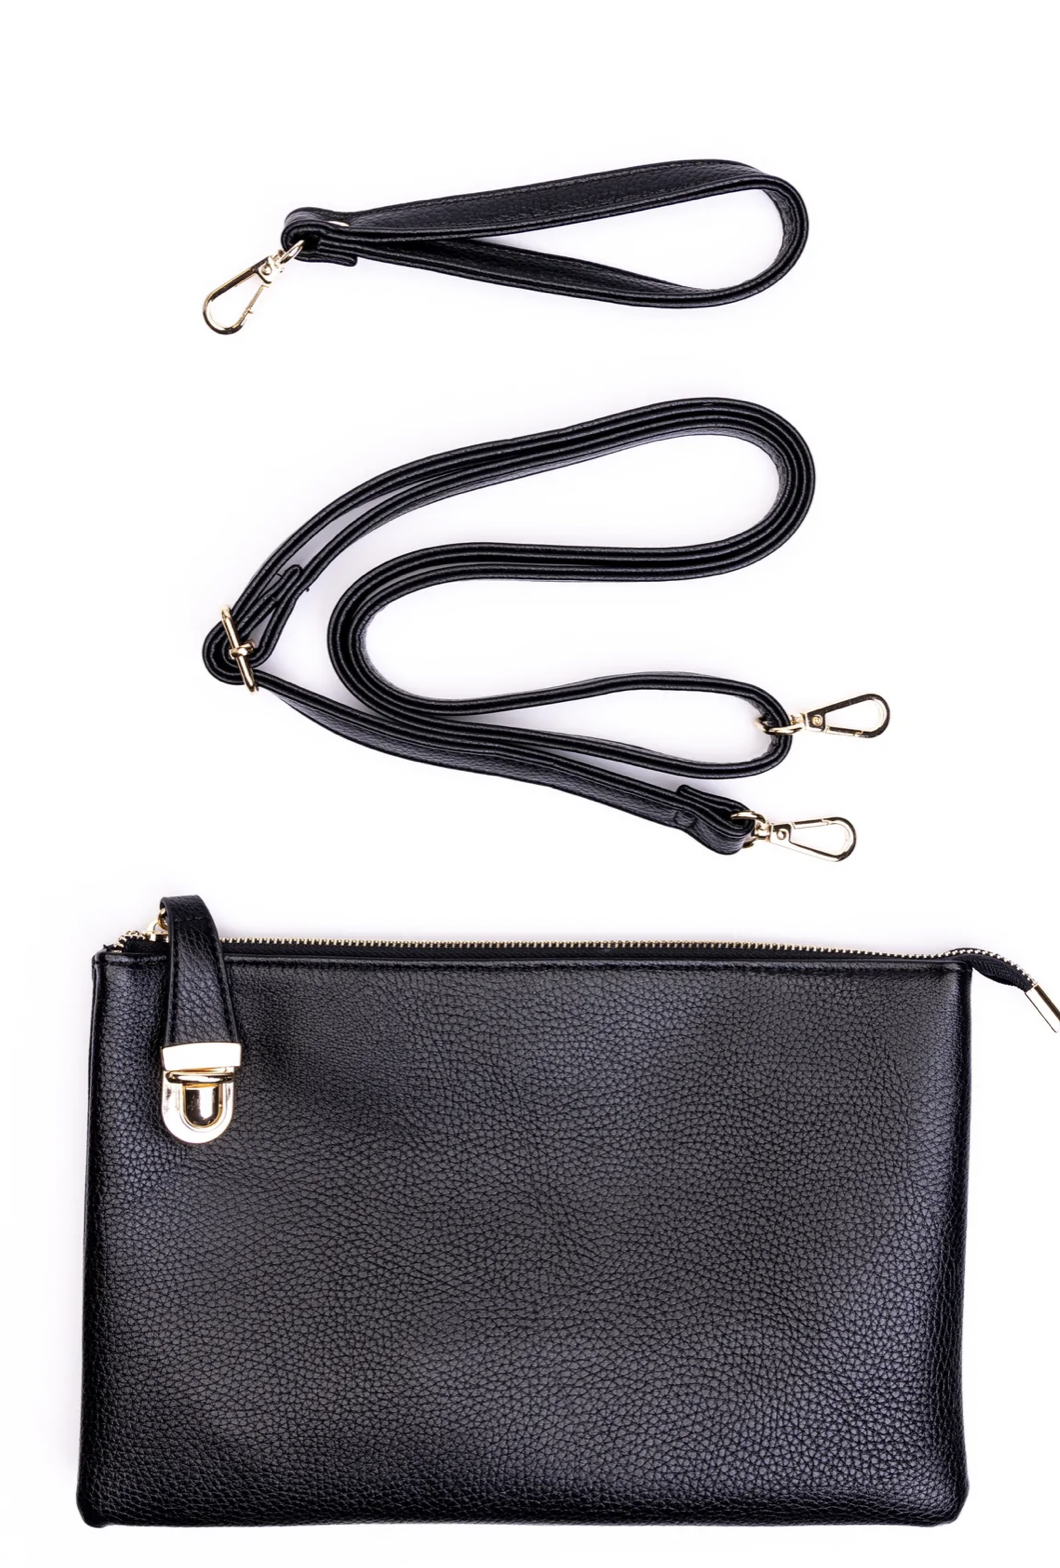 The Chloe Crossbody With 3 Straps